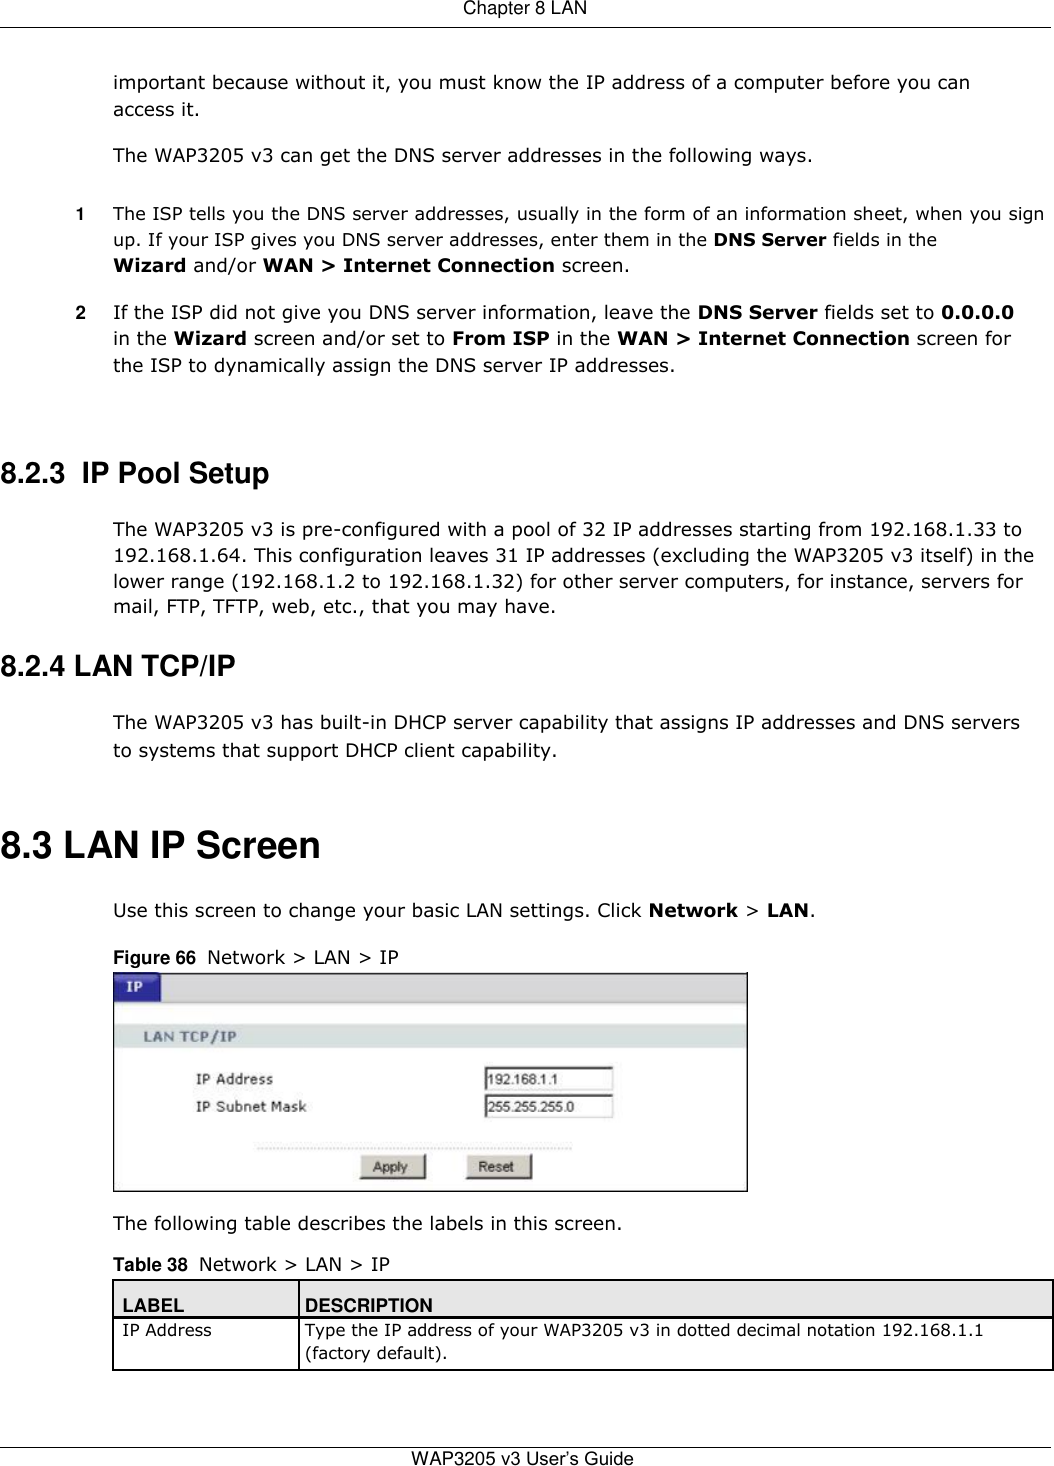  Chapter 8 LAN   important because without it, you must know the IP address of a computer before you can access it.  The WAP3205 v3 can get the DNS server addresses in the following ways.  1  The ISP tells you the DNS server addresses, usually in the form of an information sheet, when you sign up. If your ISP gives you DNS server addresses, enter them in the DNS Server fields in the Wizard and/or WAN &gt; Internet Connection screen.  2  If the ISP did not give you DNS server information, leave the DNS Server fields set to 0.0.0.0 in the Wizard screen and/or set to From ISP in the WAN &gt; Internet Connection screen for the ISP to dynamically assign the DNS server IP addresses.    8.2.3  IP Pool Setup  The WAP3205 v3 is pre-configured with a pool of 32 IP addresses starting from 192.168.1.33 to 192.168.1.64. This configuration leaves 31 IP addresses (excluding the WAP3205 v3 itself) in the lower range (192.168.1.2 to 192.168.1.32) for other server computers, for instance, servers for mail, FTP, TFTP, web, etc., that you may have.  8.2.4 LAN TCP/IP  The WAP3205 v3 has built-in DHCP server capability that assigns IP addresses and DNS servers to systems that support DHCP client capability.   8.3 LAN IP Screen  Use this screen to change your basic LAN settings. Click Network &gt; LAN.  Figure 66  Network &gt; LAN &gt; IP            The following table describes the labels in this screen.  Table 38  Network &gt; LAN &gt; IP  LABEL DESCRIPTION IP Address Type the IP address of your WAP3205 v3 in dotted decimal notation 192.168.1.1  (factory default).      WAP3205 v3 User’s Guide 